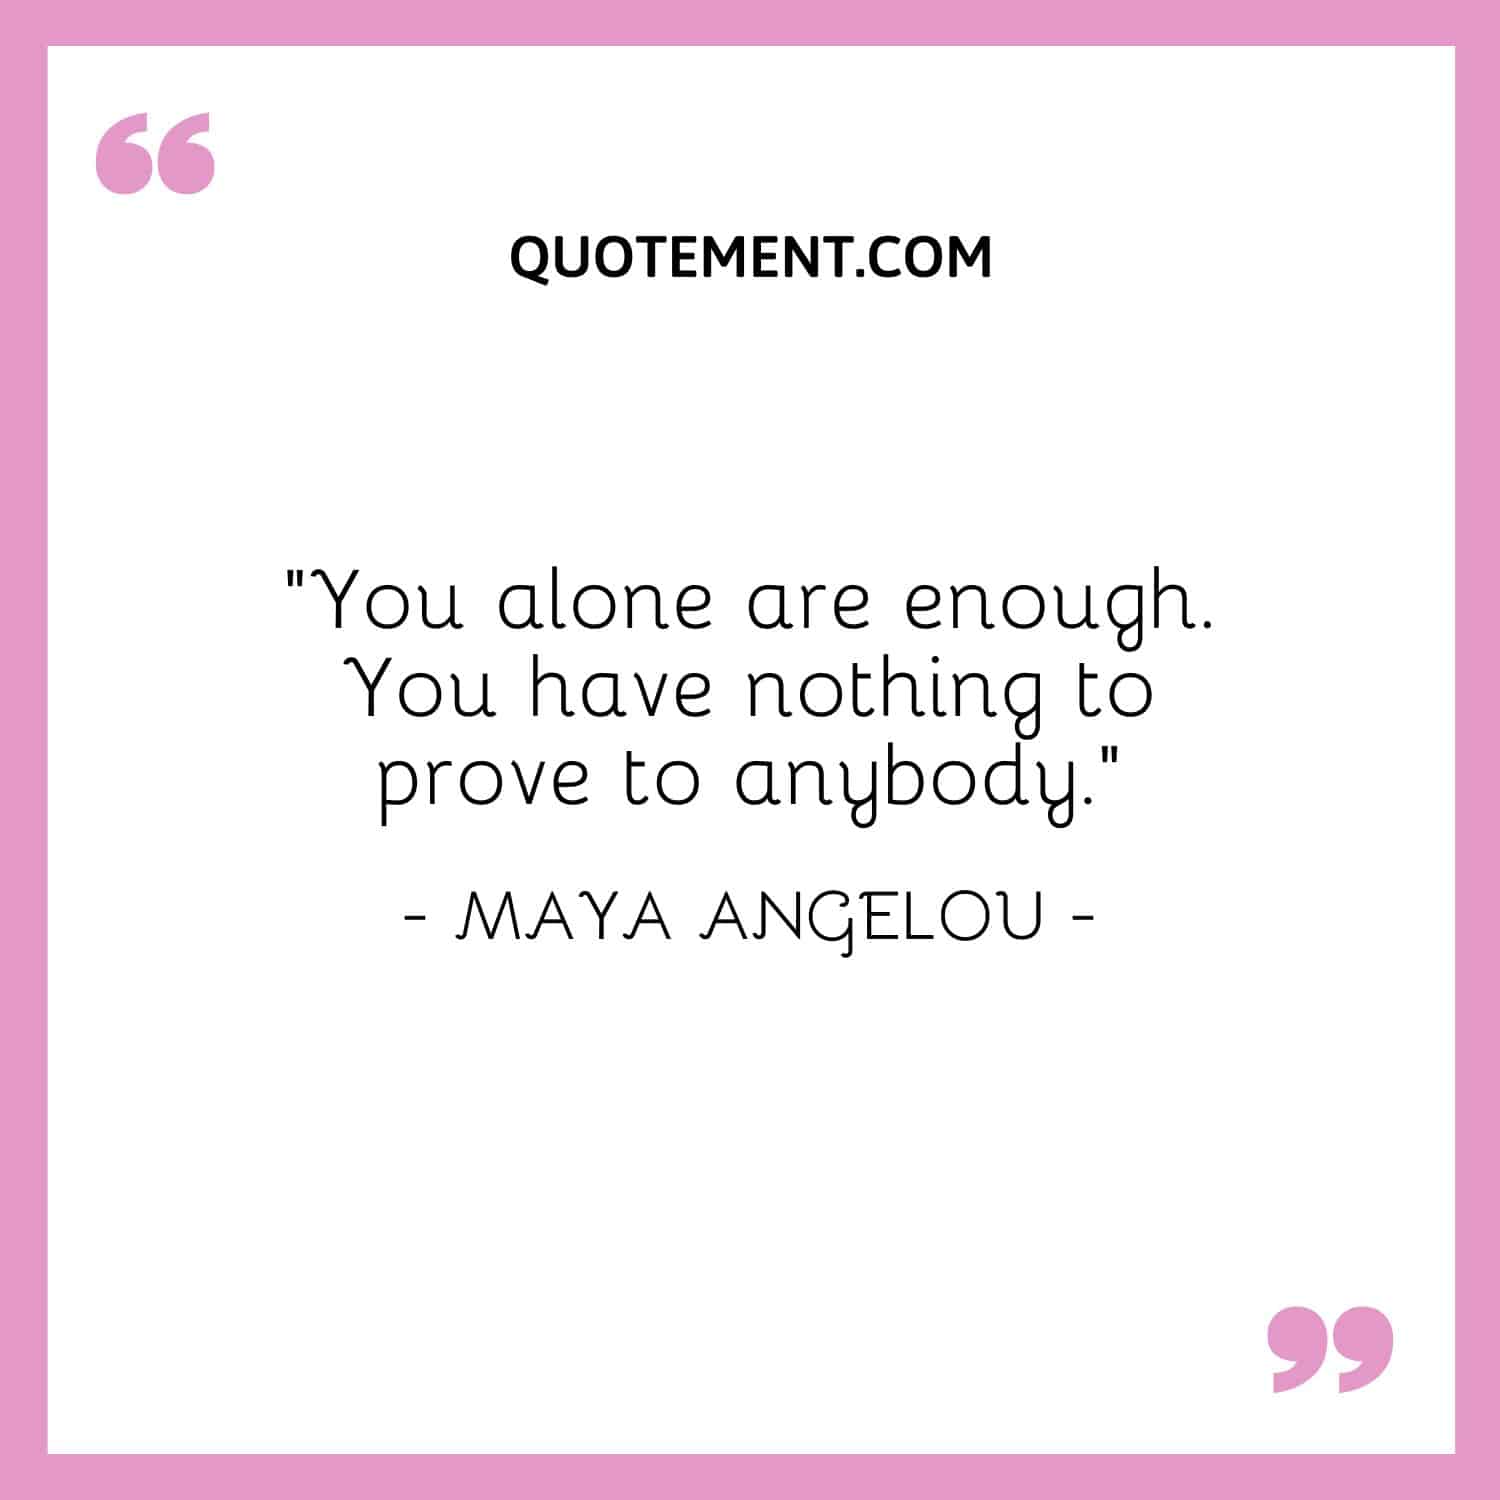 You alone are enough. You have nothing to prove to anybody